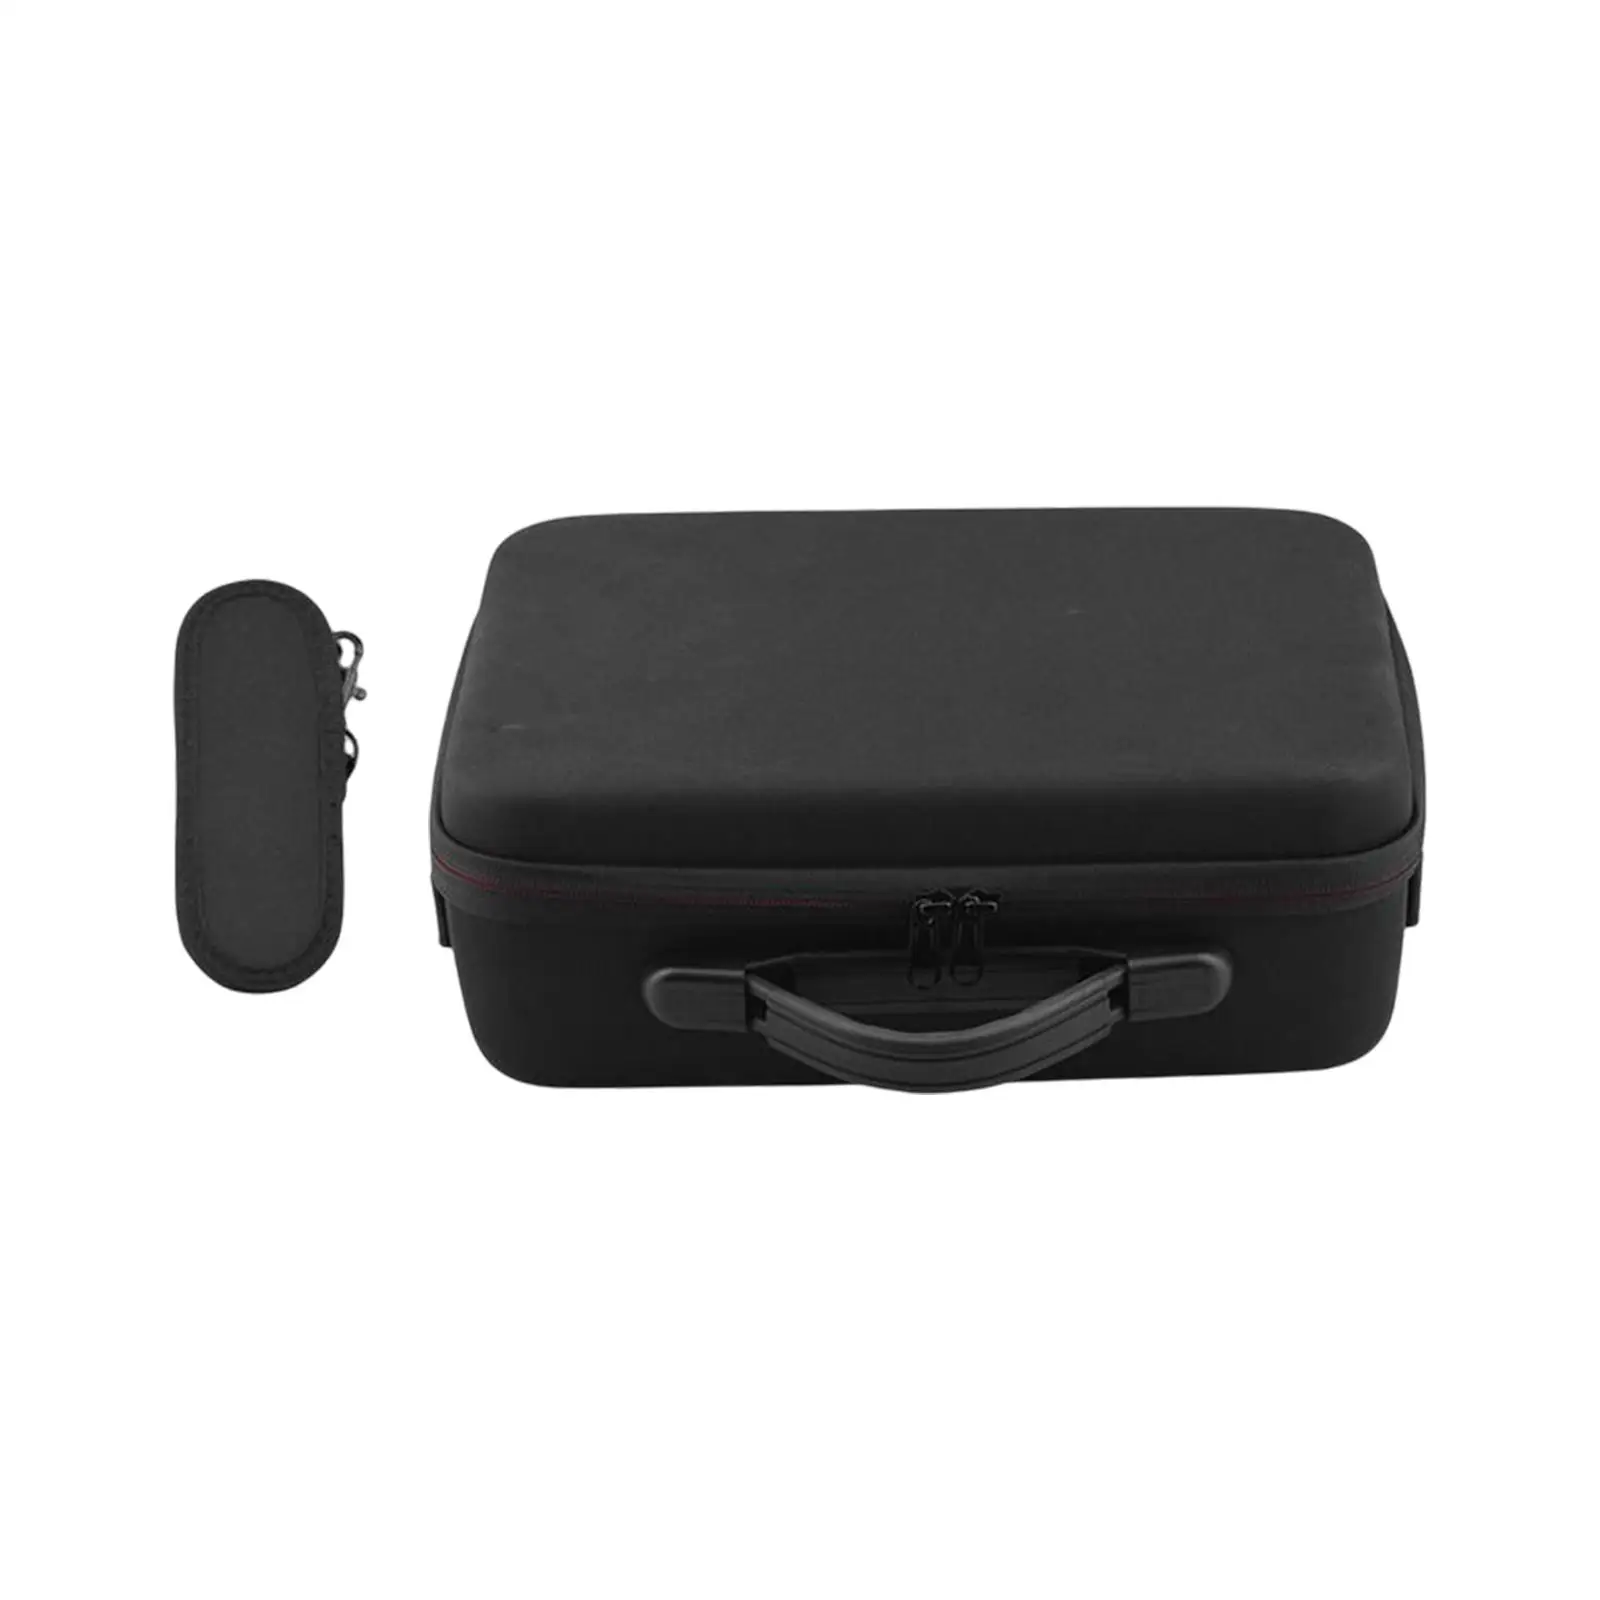 Portable Drone Carrying Case Storage Bag Remote Control Storage Shockproof Travel Bag for Air Drone Accessories